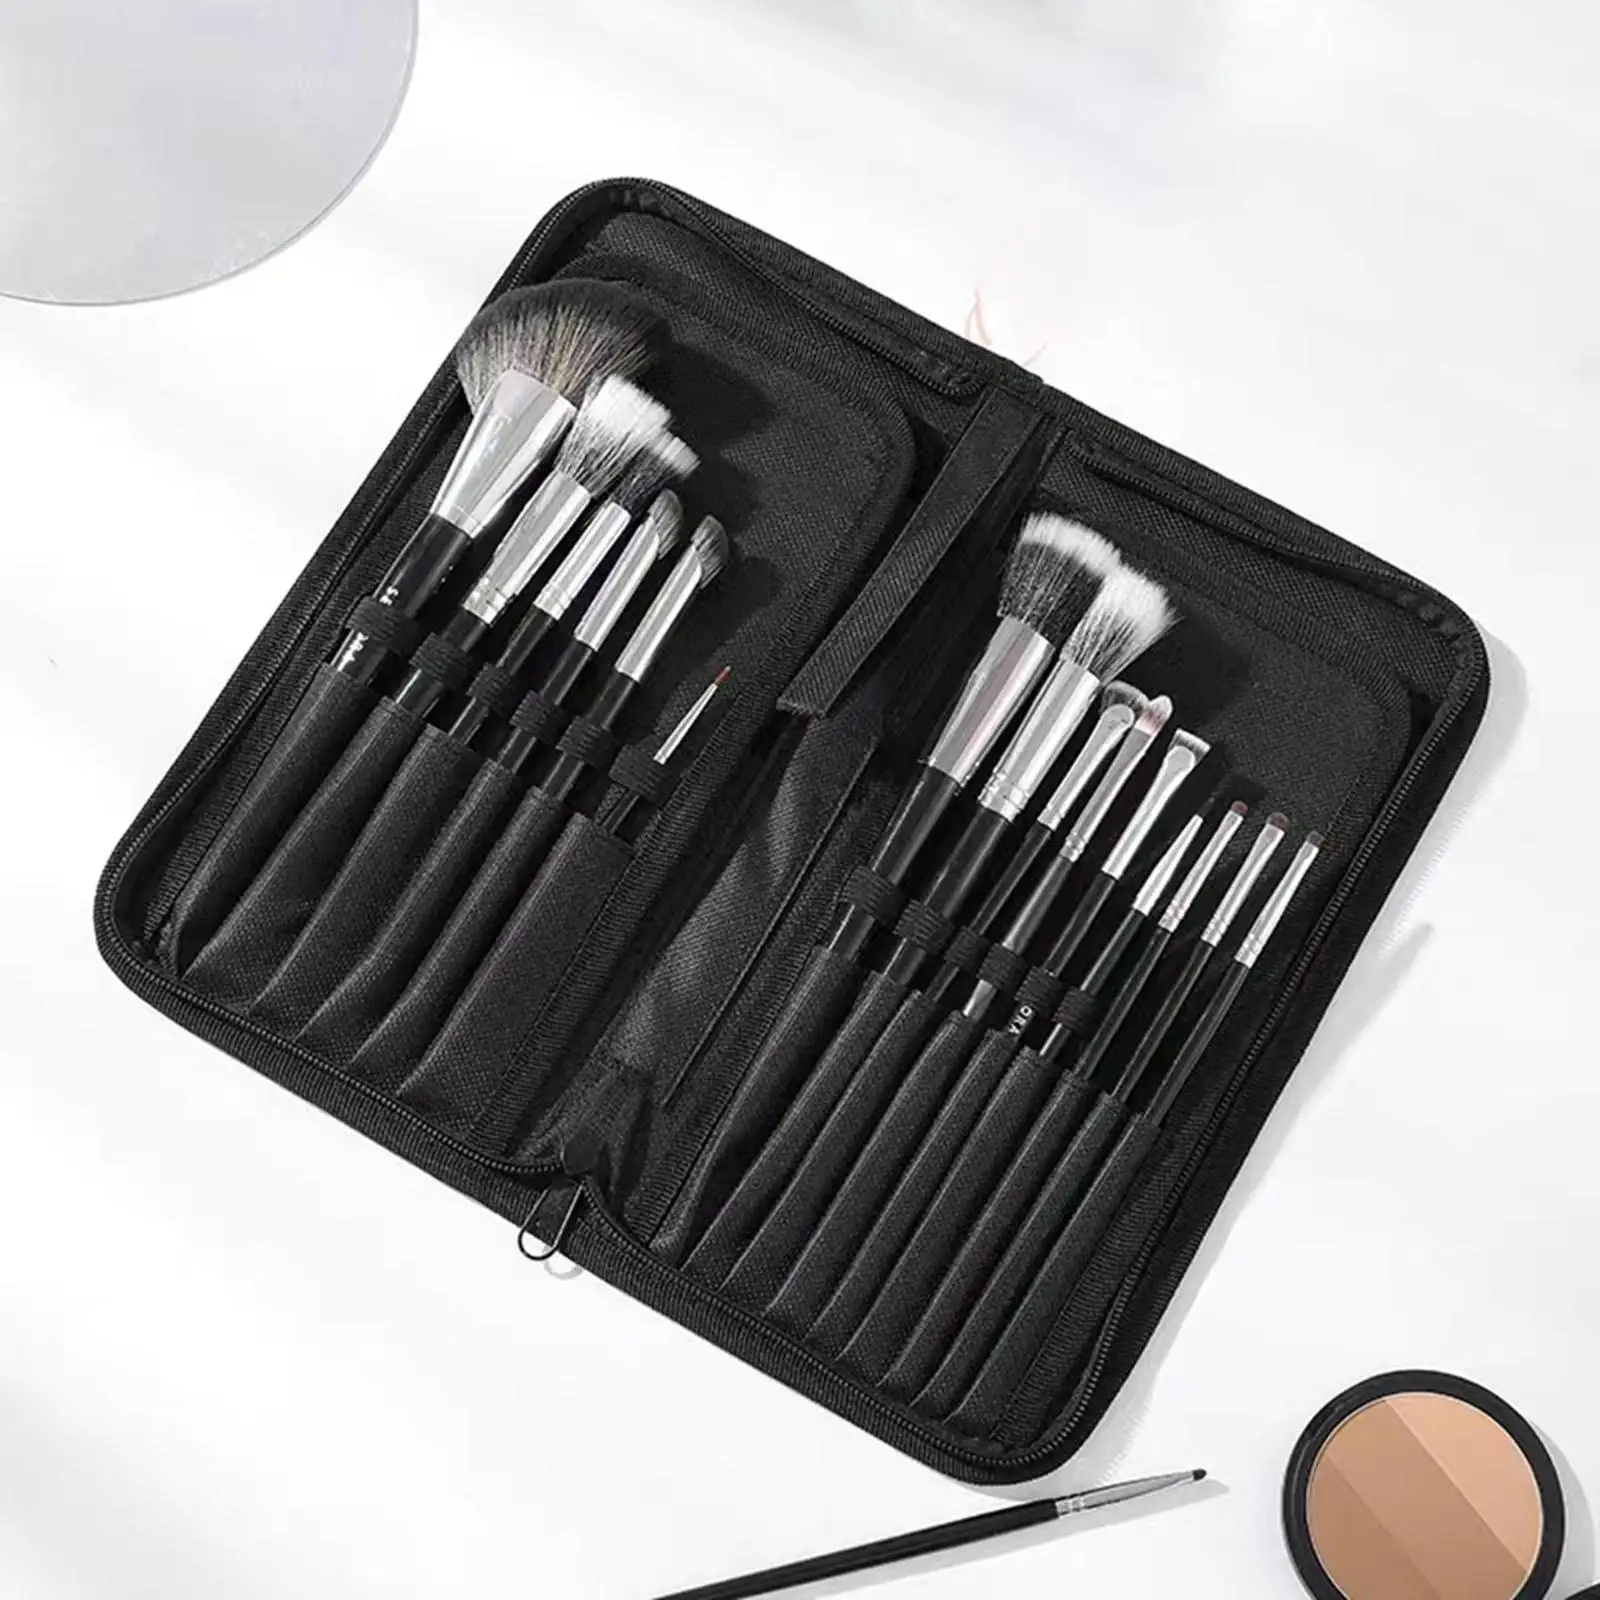 Makeup Brush Holder Cosmetic Case 15 Slot Makeup Artists Travel Size Pouch Home Use Makeup Brushes Organizer Bag Cosmetic Bag